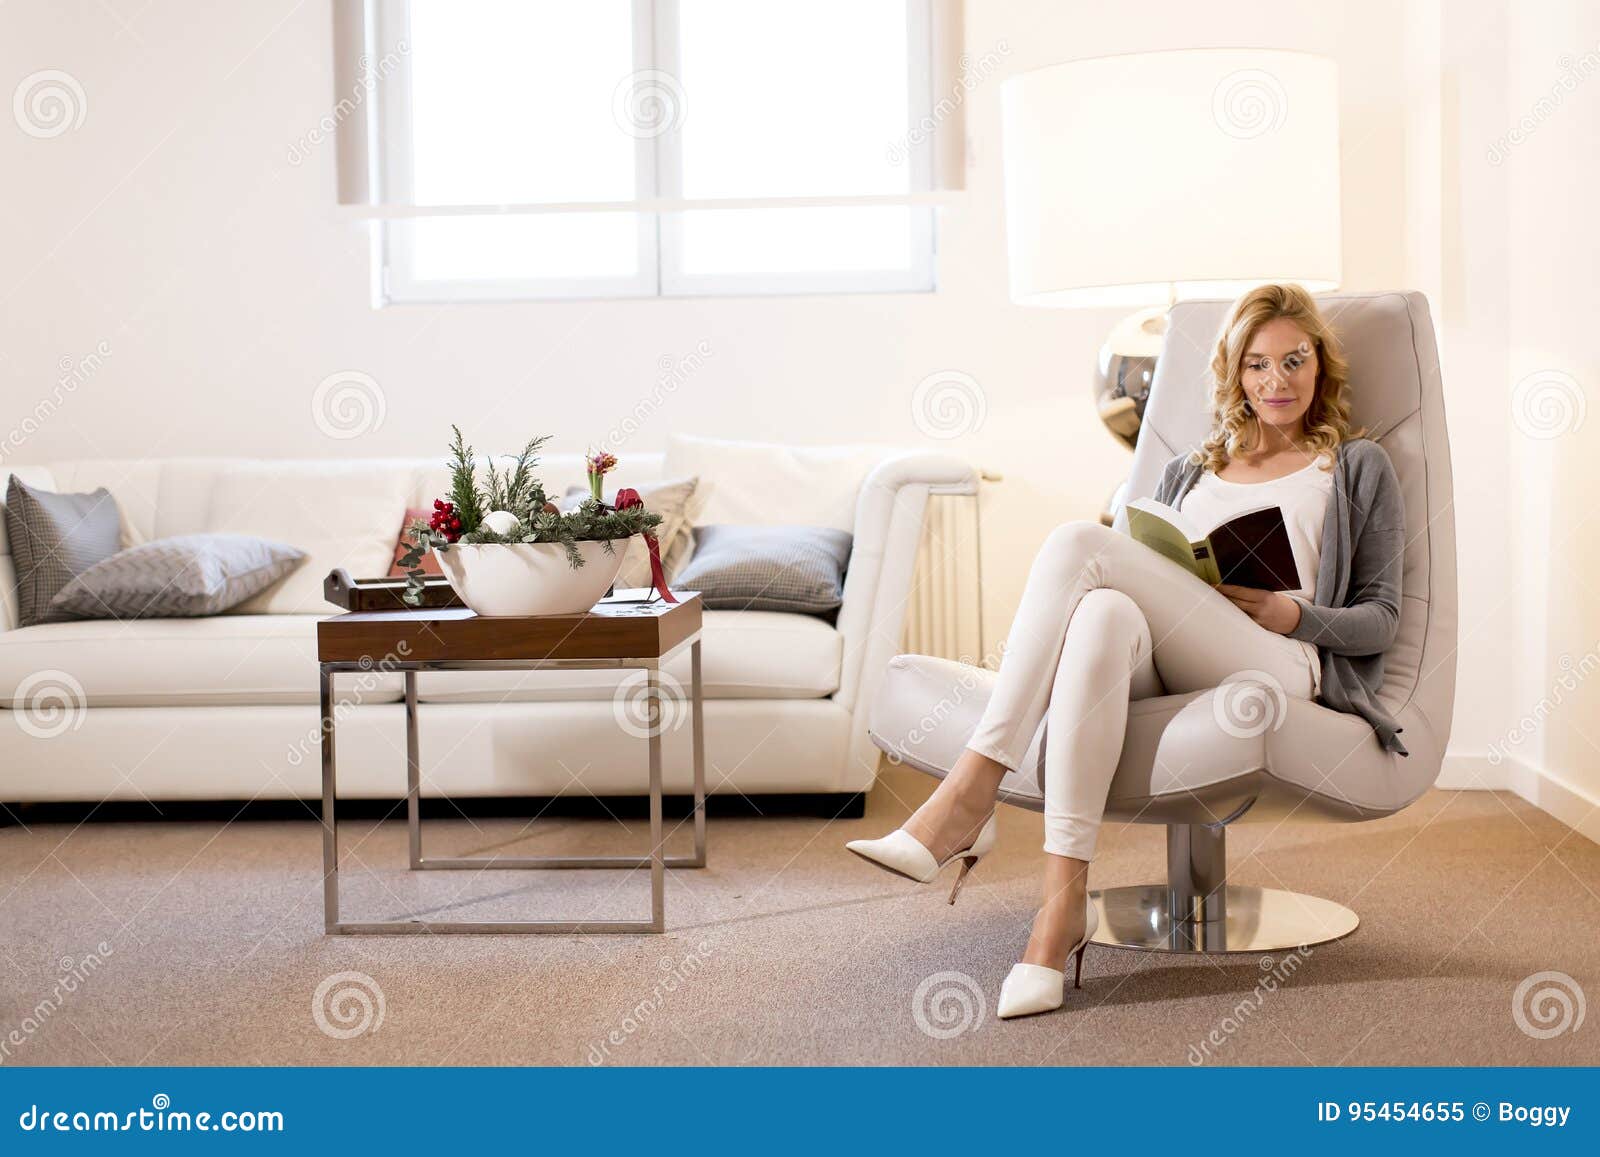 woman reading a book and sitting on comfortable chair at home